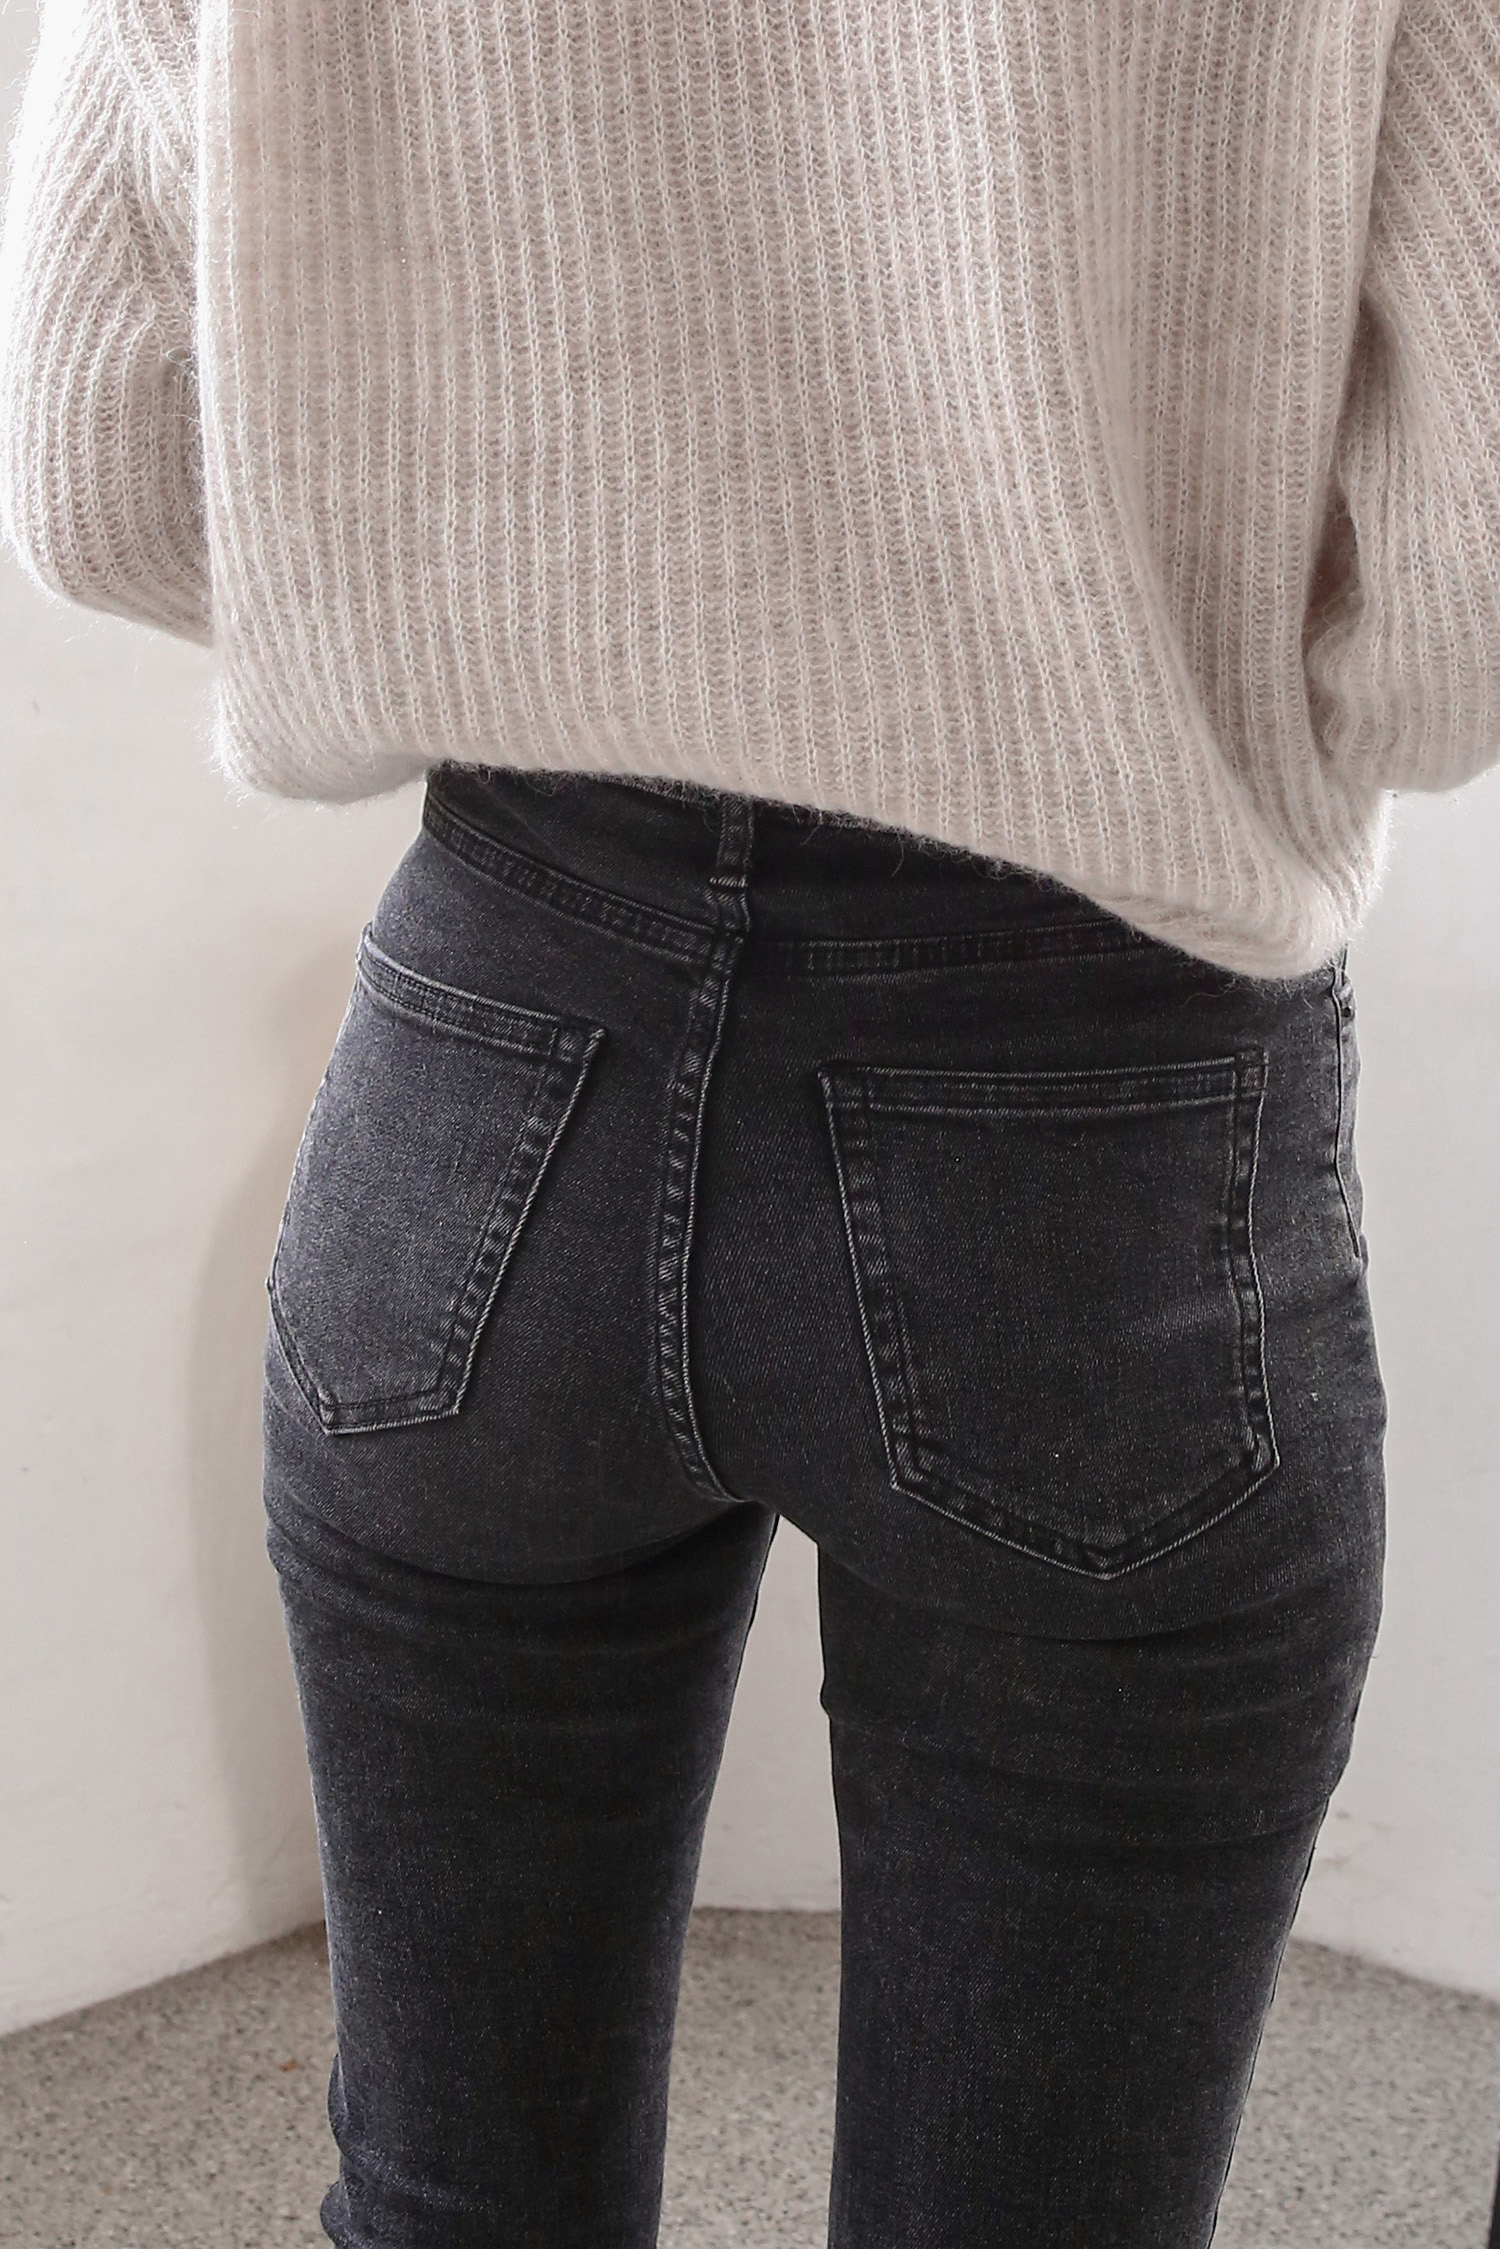 Authentic Stretch High Rise Skinny Button Fly Jean Review